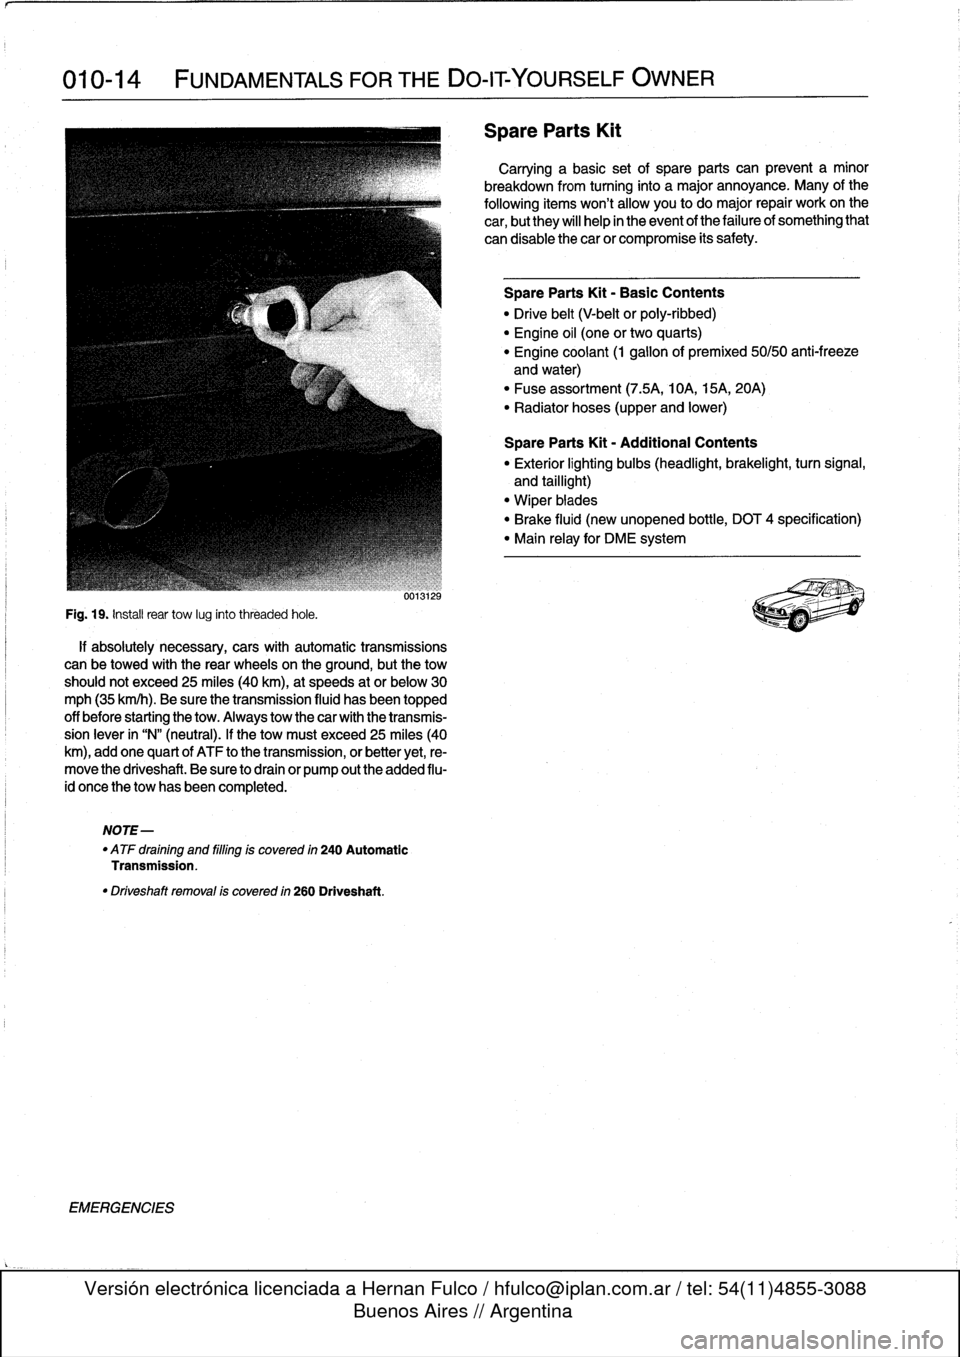 BMW 318i 1998 E36 Workshop Manual 
010-14

	

FUNDAMENTALS
FOR
THE
DO-ITYOURSELF
OWNER

Fig
.
19
.
Instaf
rear
tow
lug
into
threaded
hole
.

if
absolutely
necessary,
cars
with
automatic
transmissions
can
be
towed
with
the
rear
wheels
